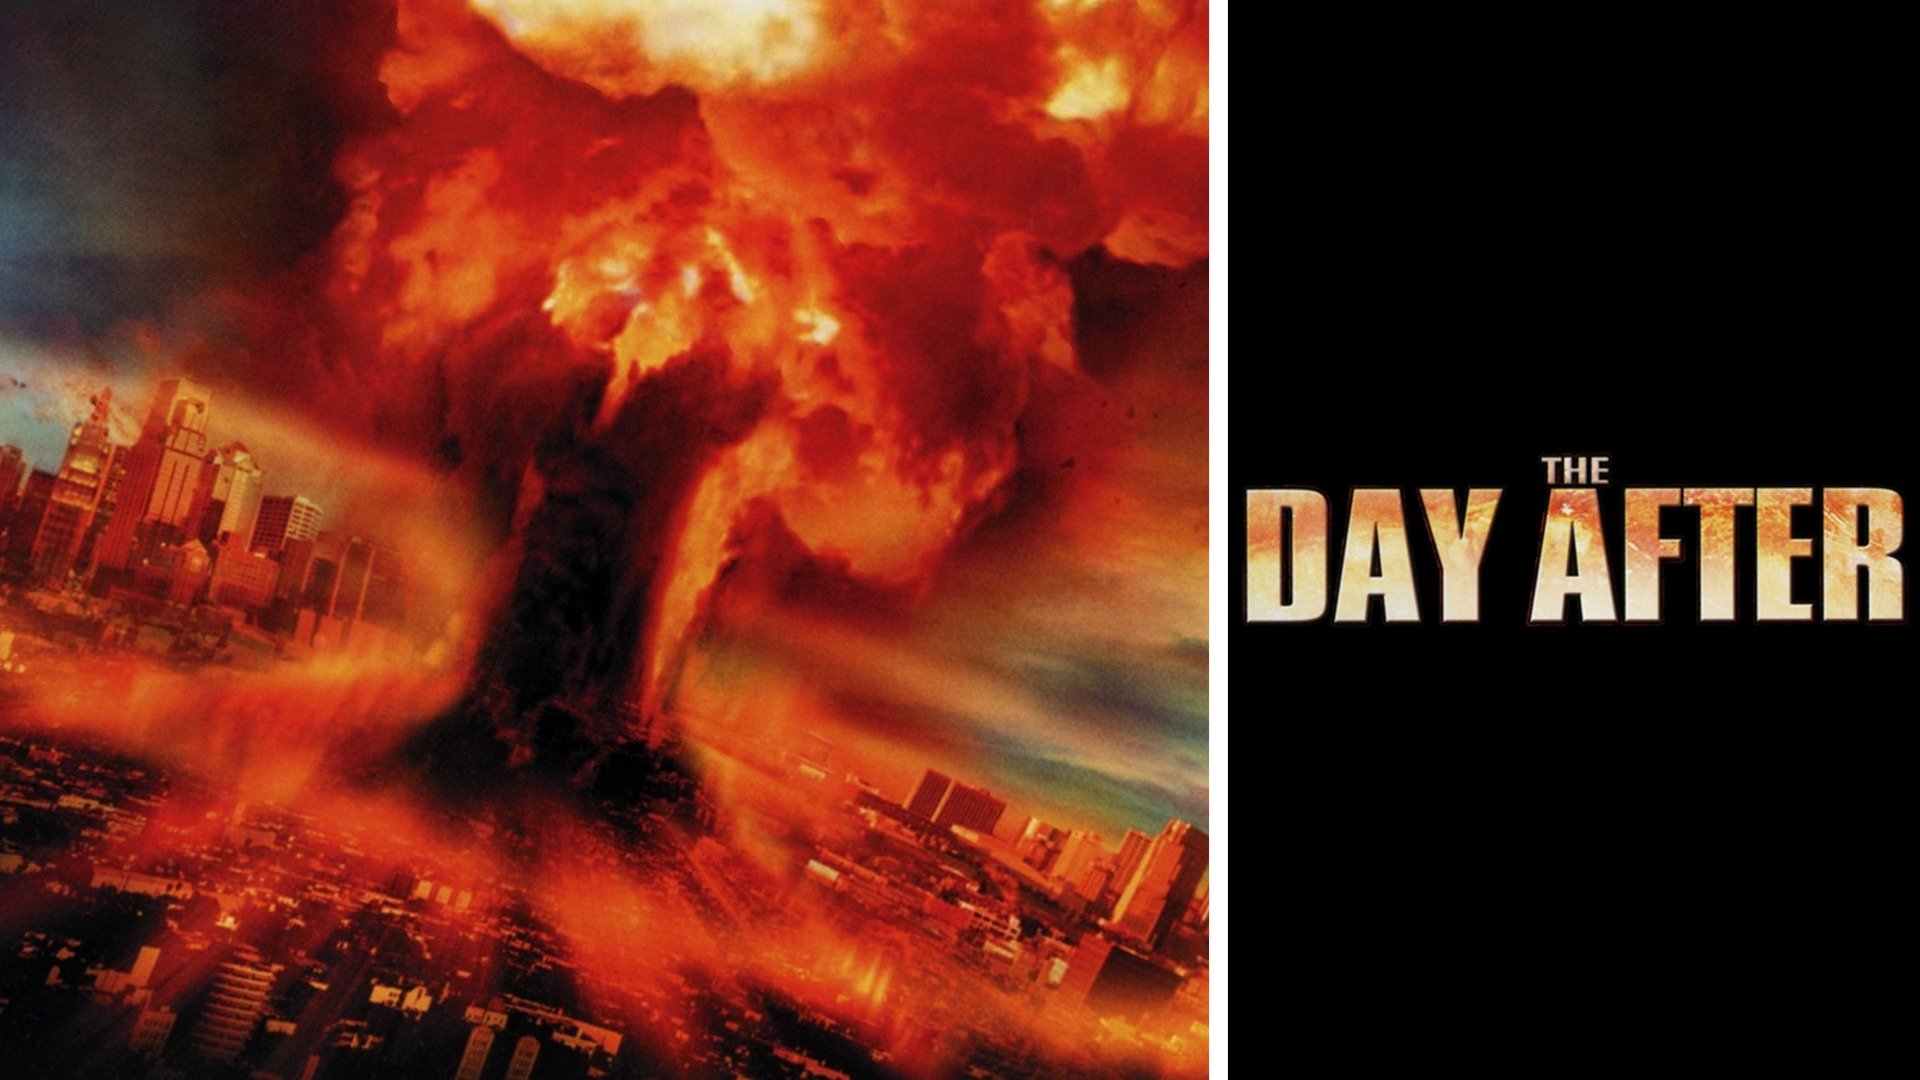 32-facts-about-the-movie-the-day-after